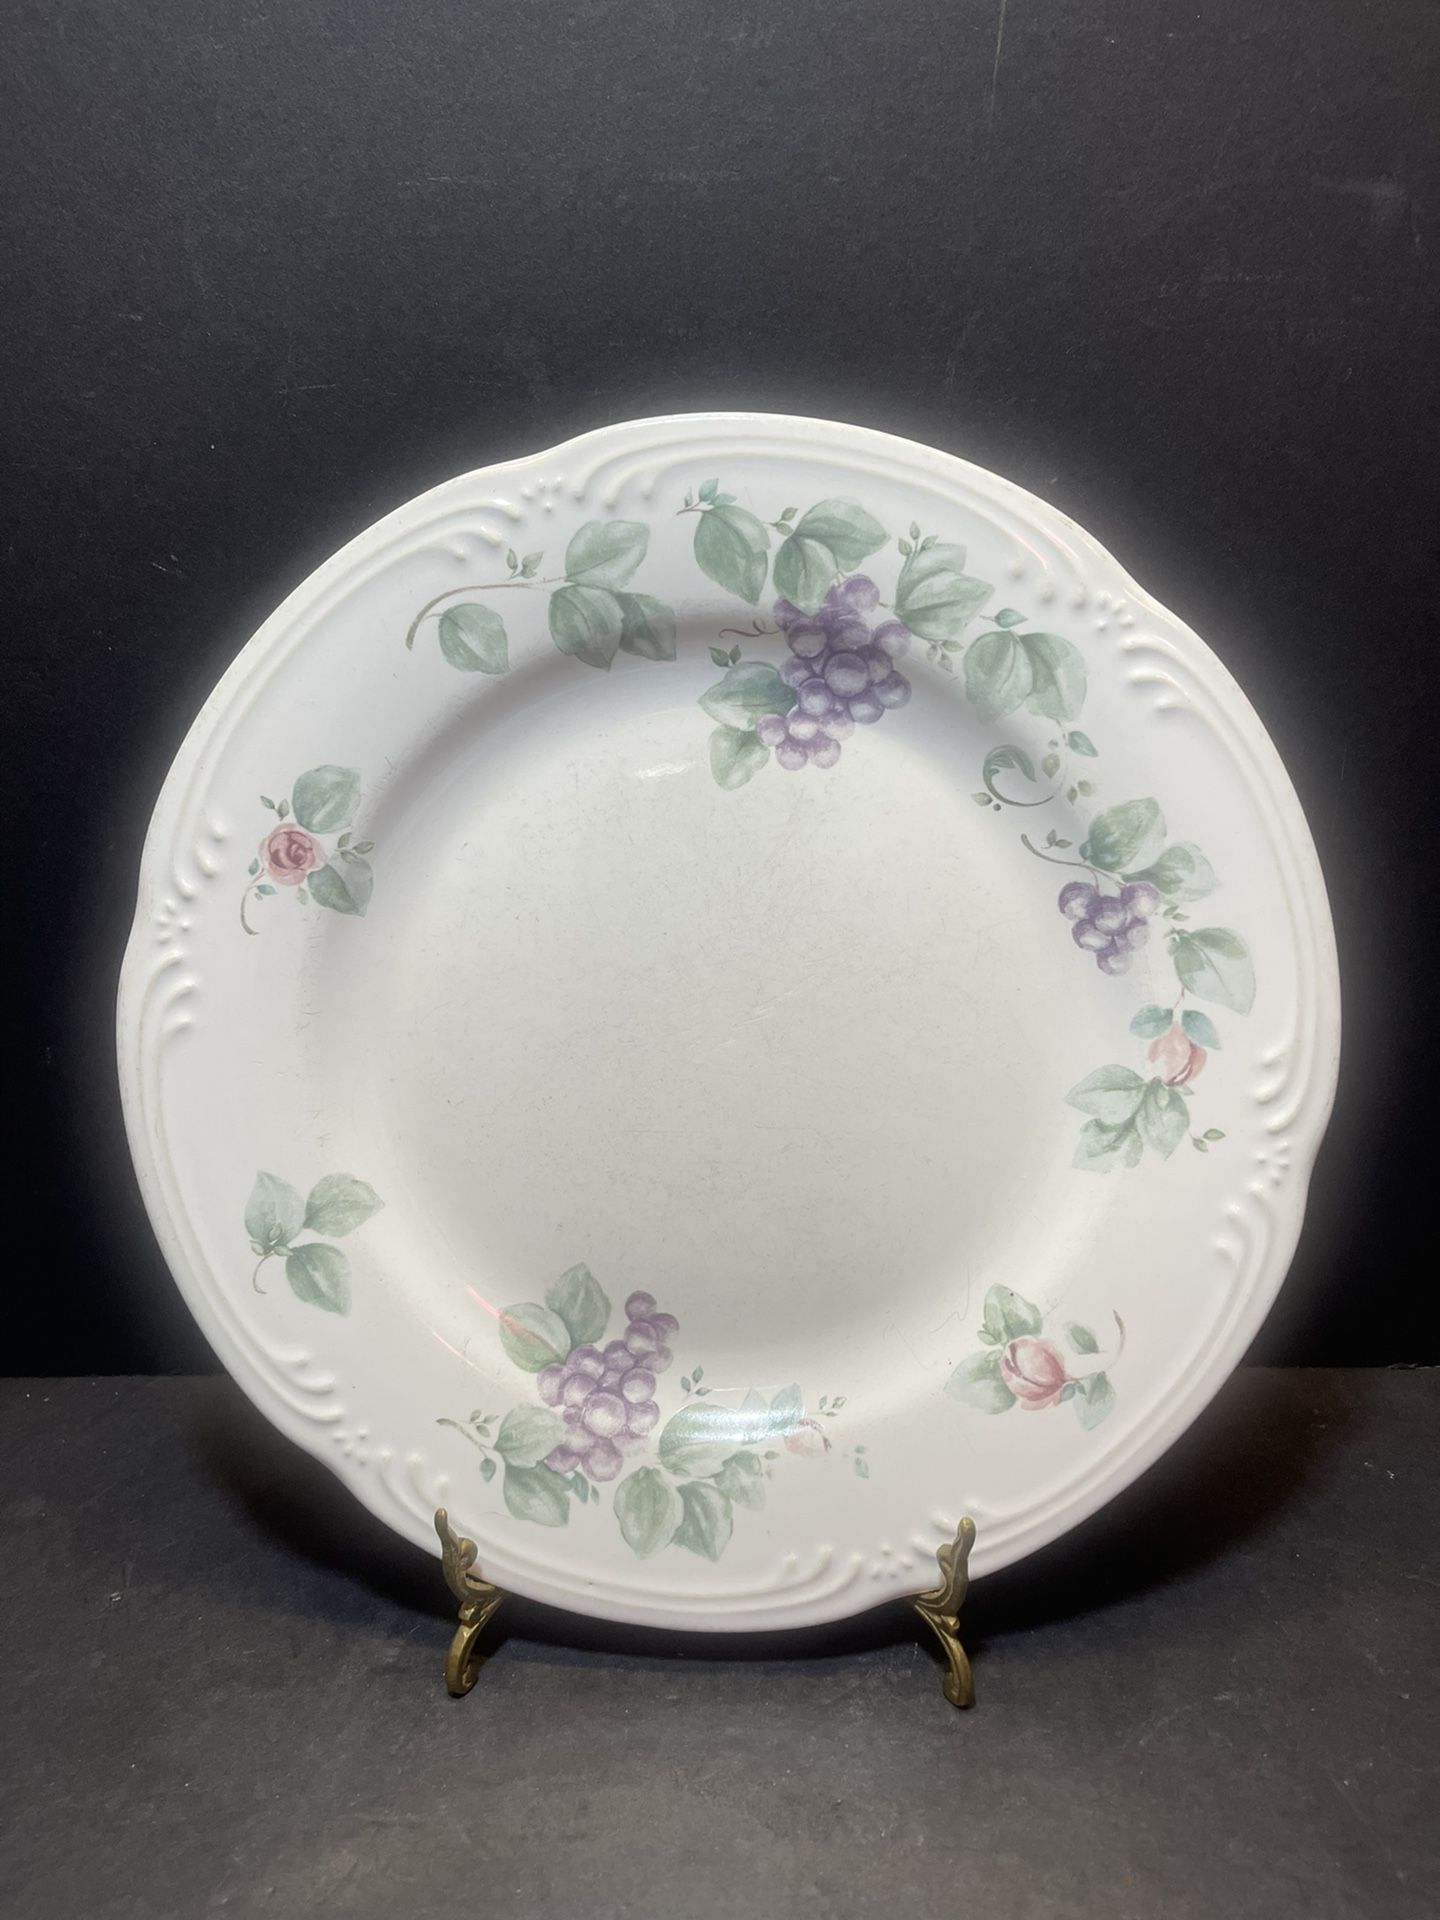 Vintage Dinner Plate 10 3/8 in Grapevine by Pfaltzgraff (4 available)